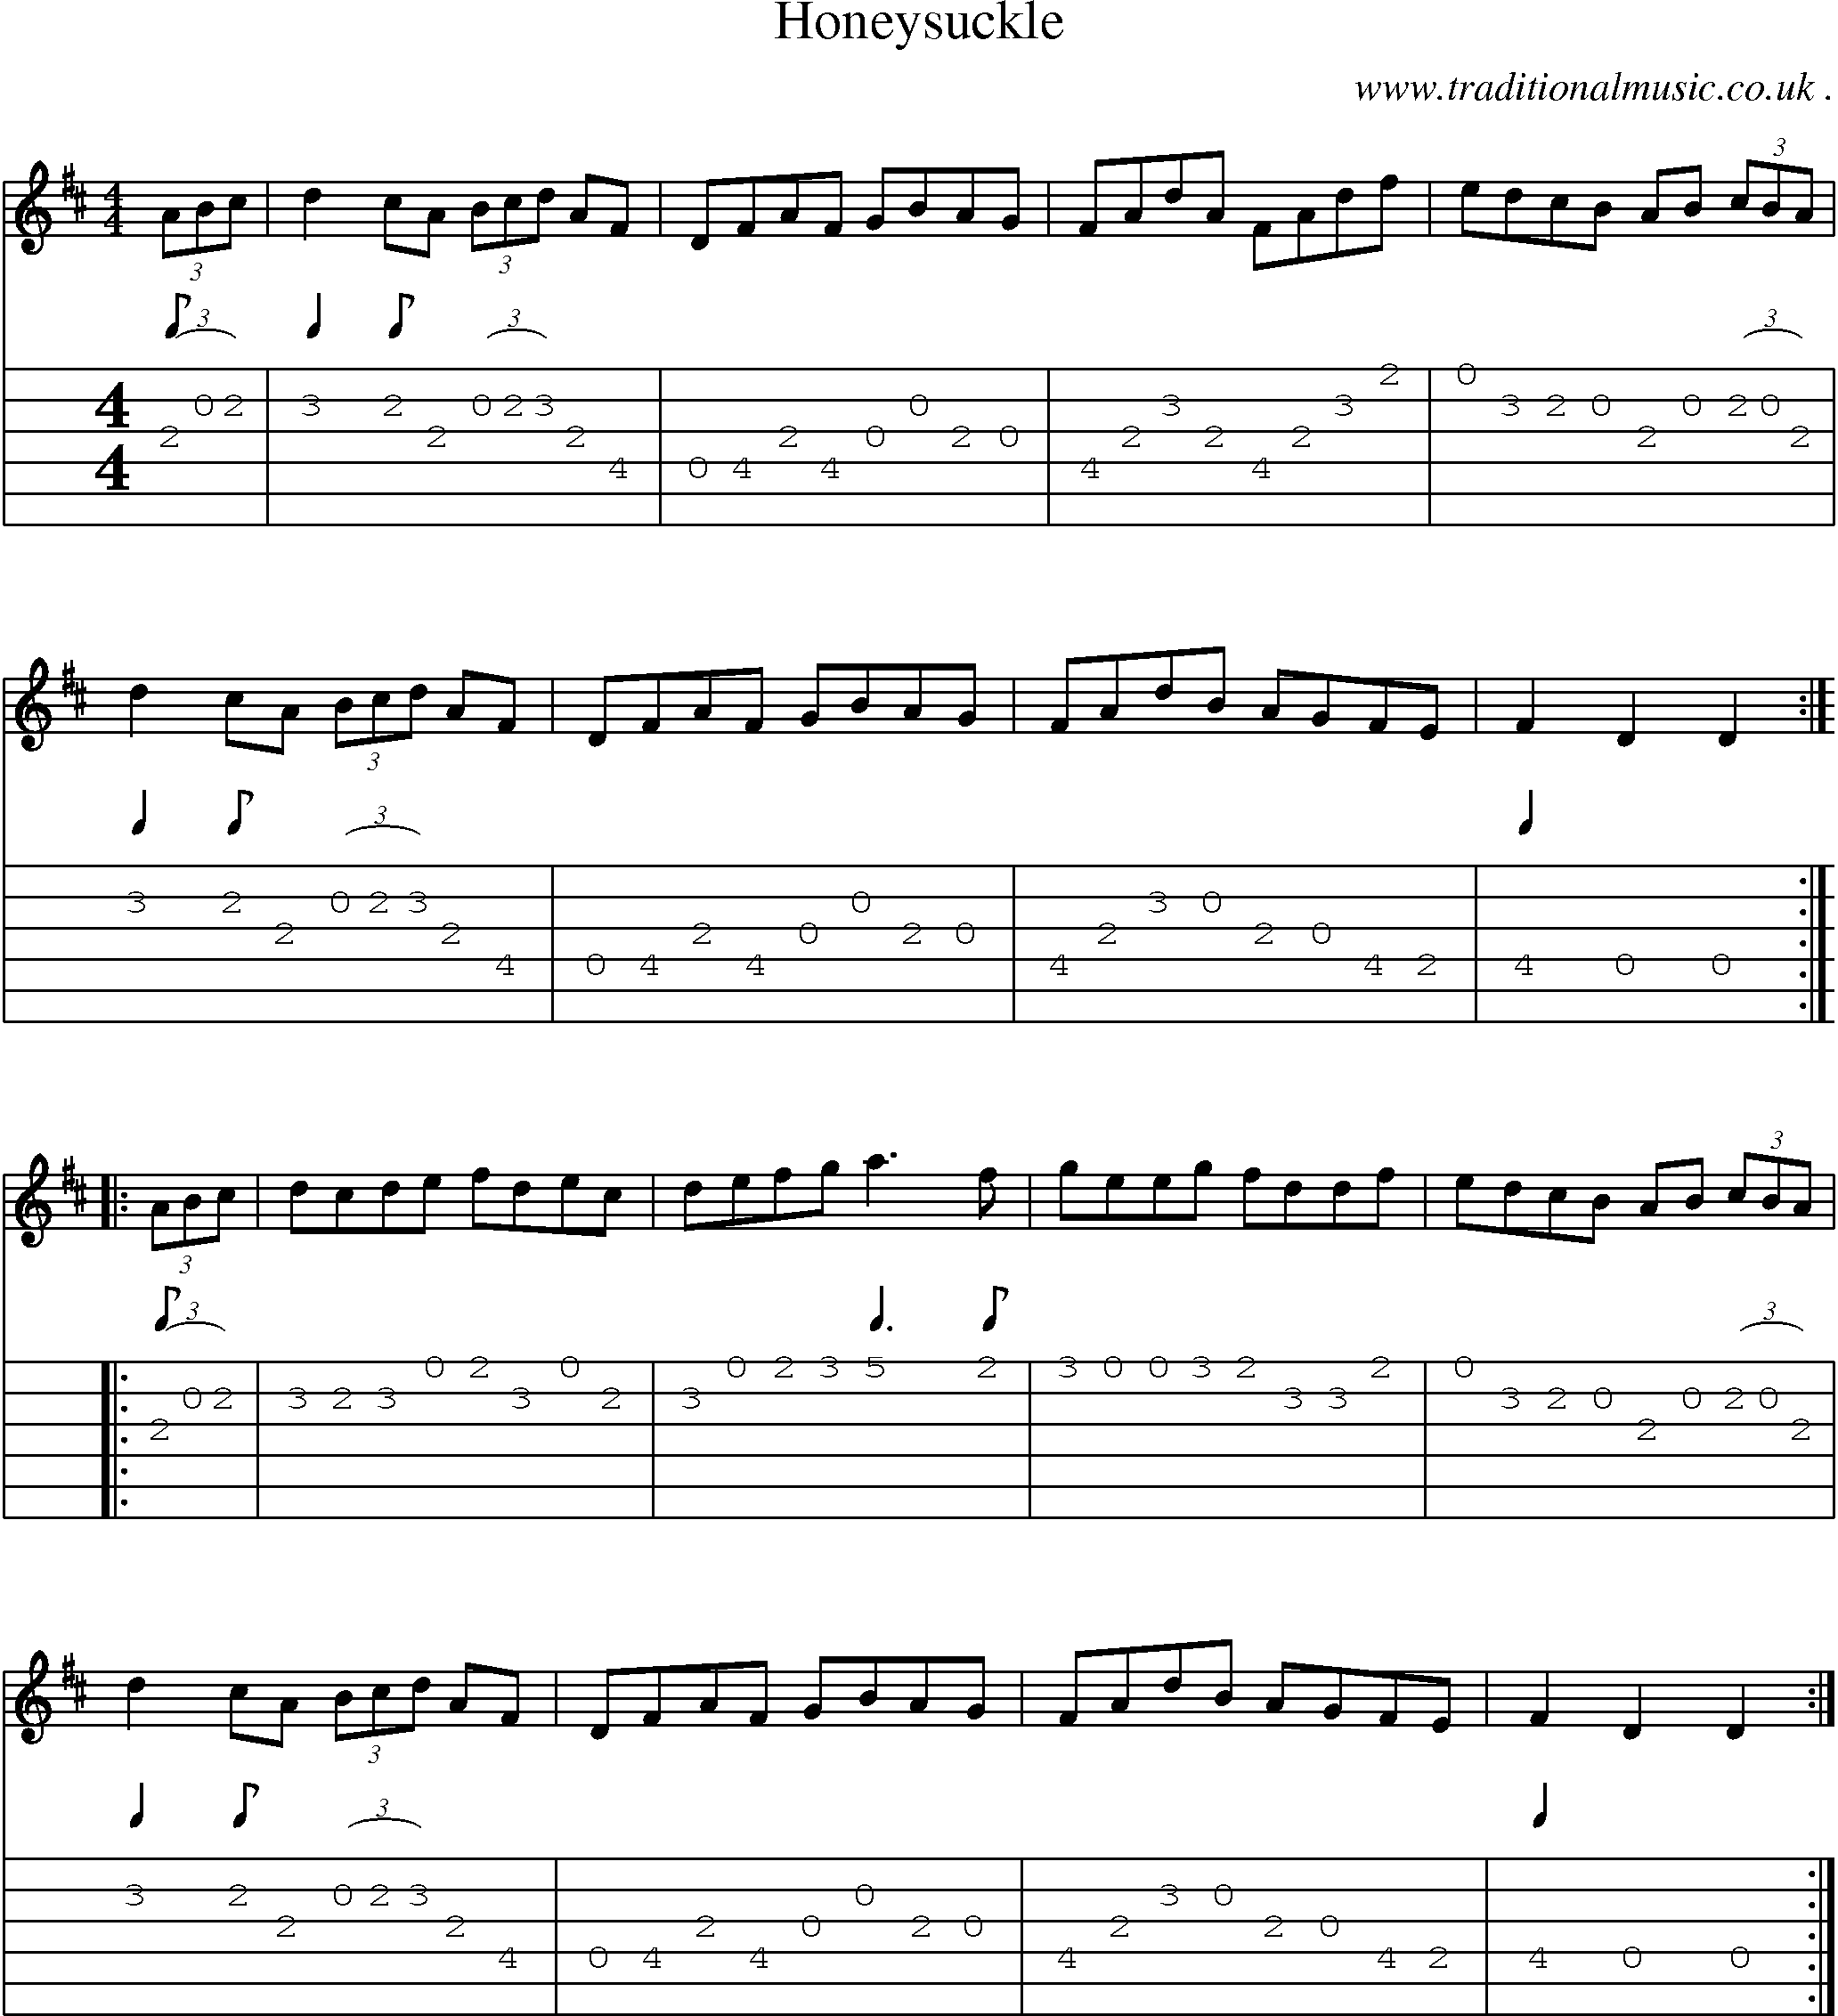 Sheet-Music and Guitar Tabs for Honeysuckle